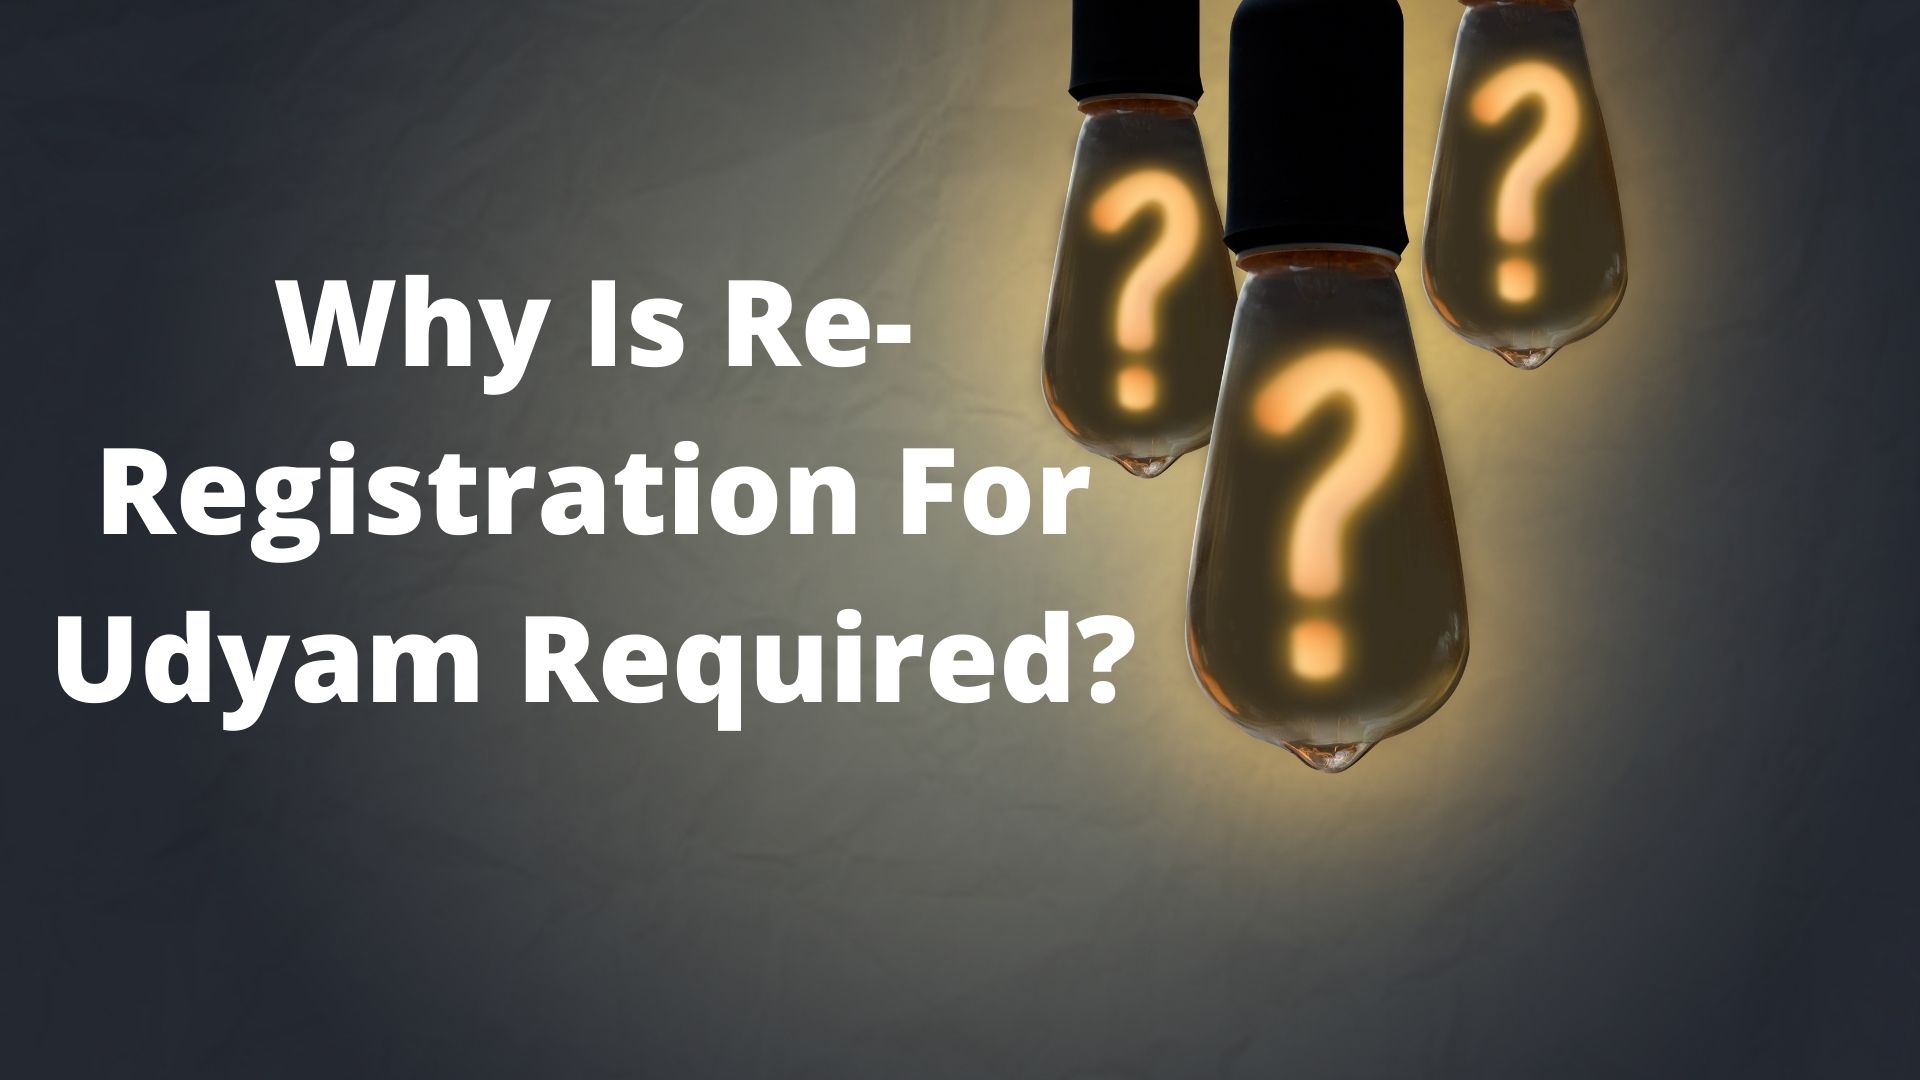 Why Is Re-Registration for Udyam Required?